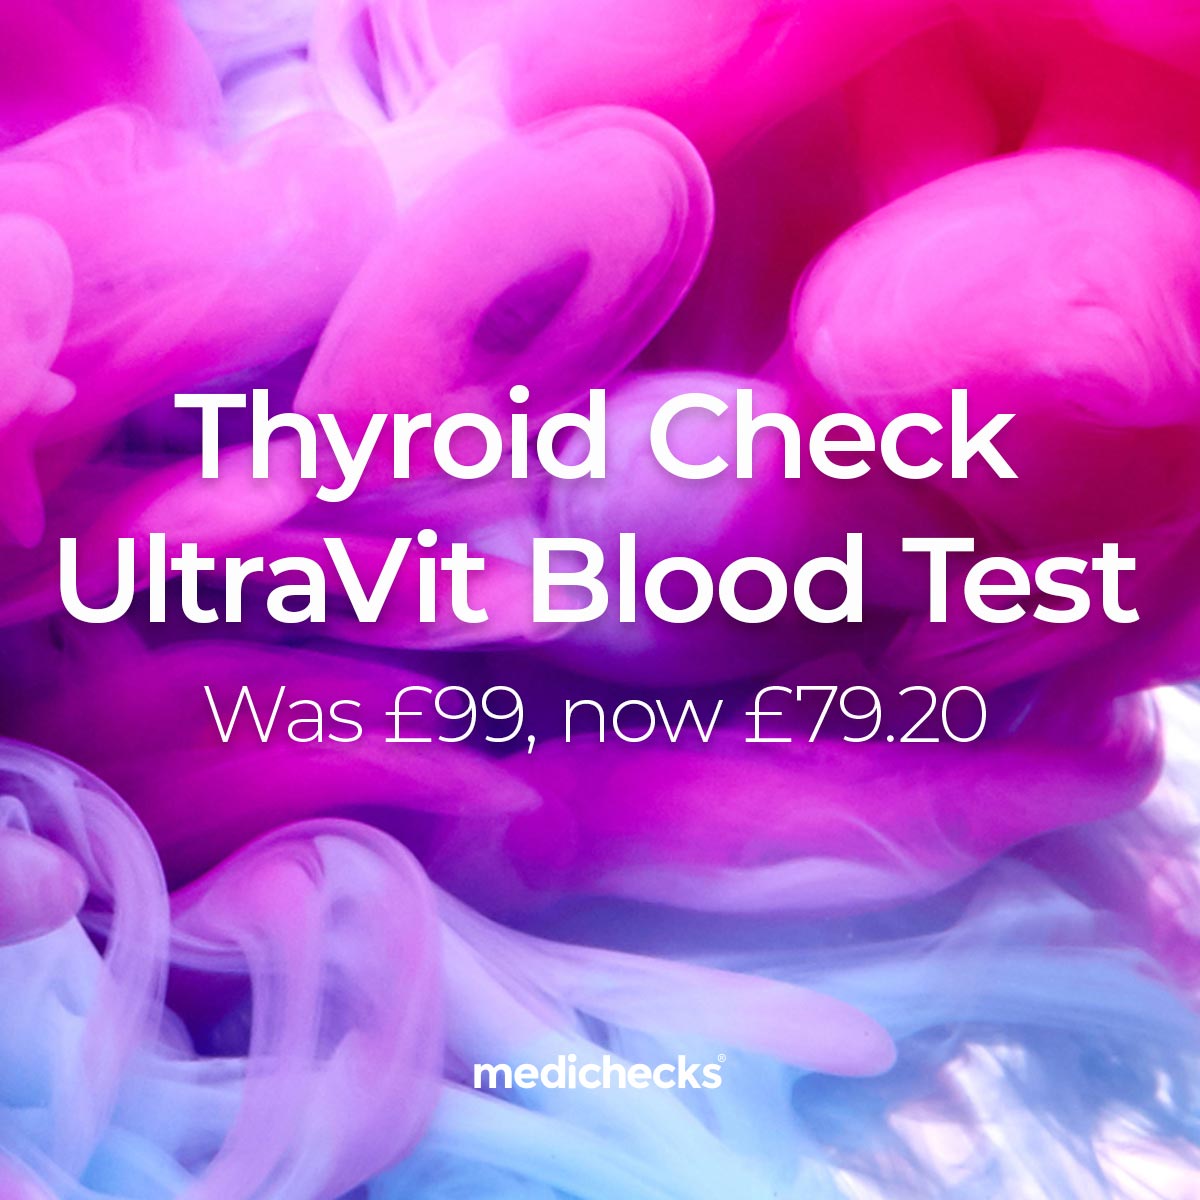 A pink and purple background with text overlaid that reads: Thyroid check UltraVit Blood test. Was £99 now £79.20. The image is clickable and takes you to the Medichecks page.